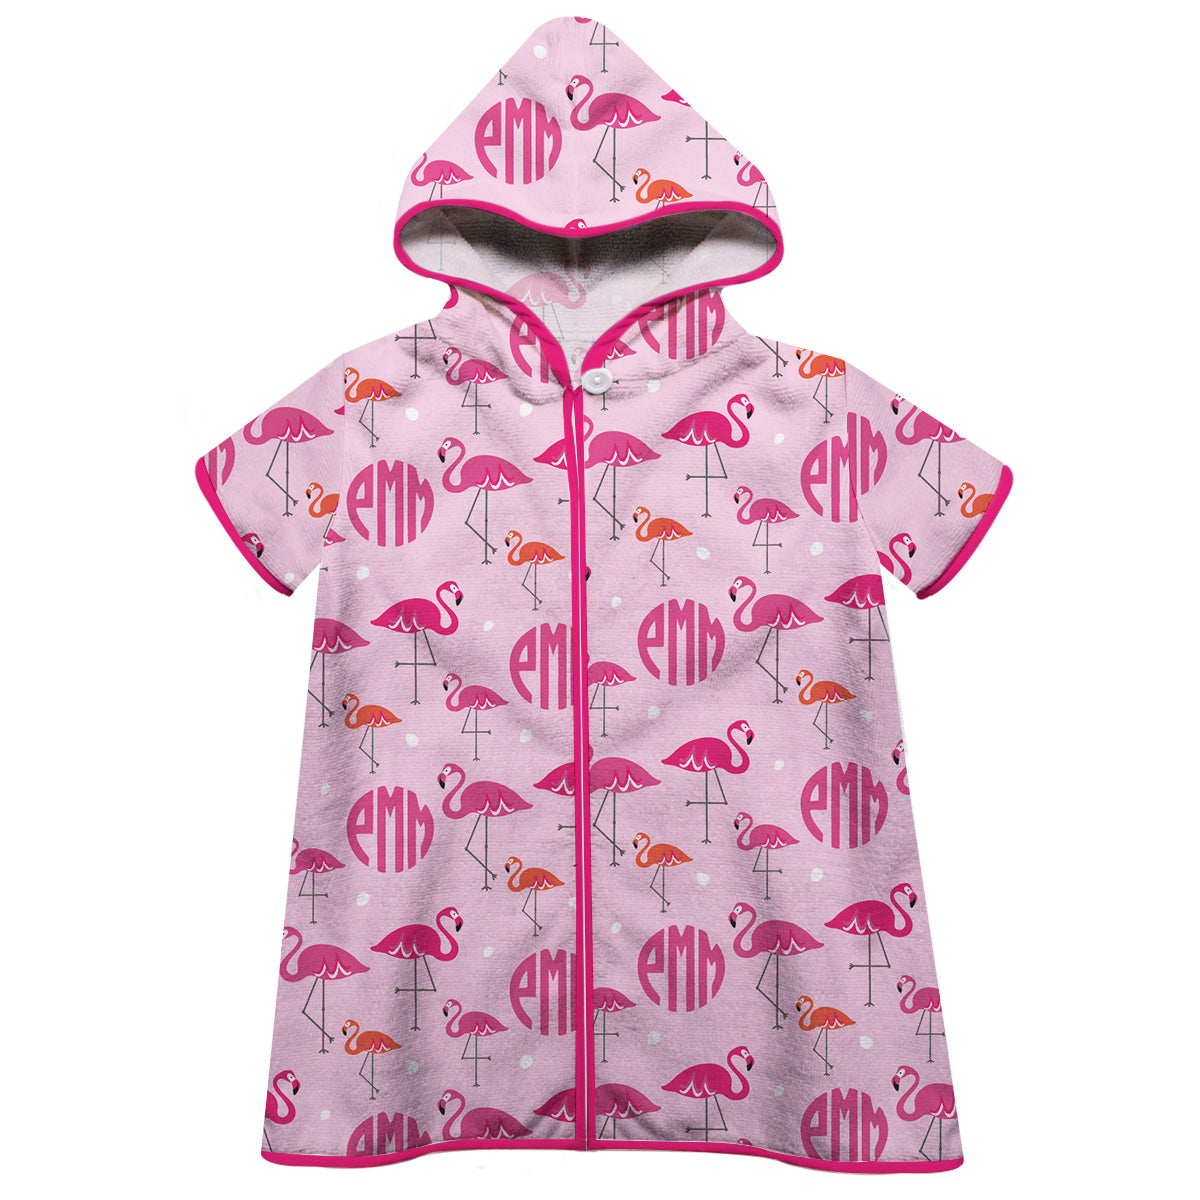 Flamingo and Monogram Print Pink Short Sleeve Cover Up